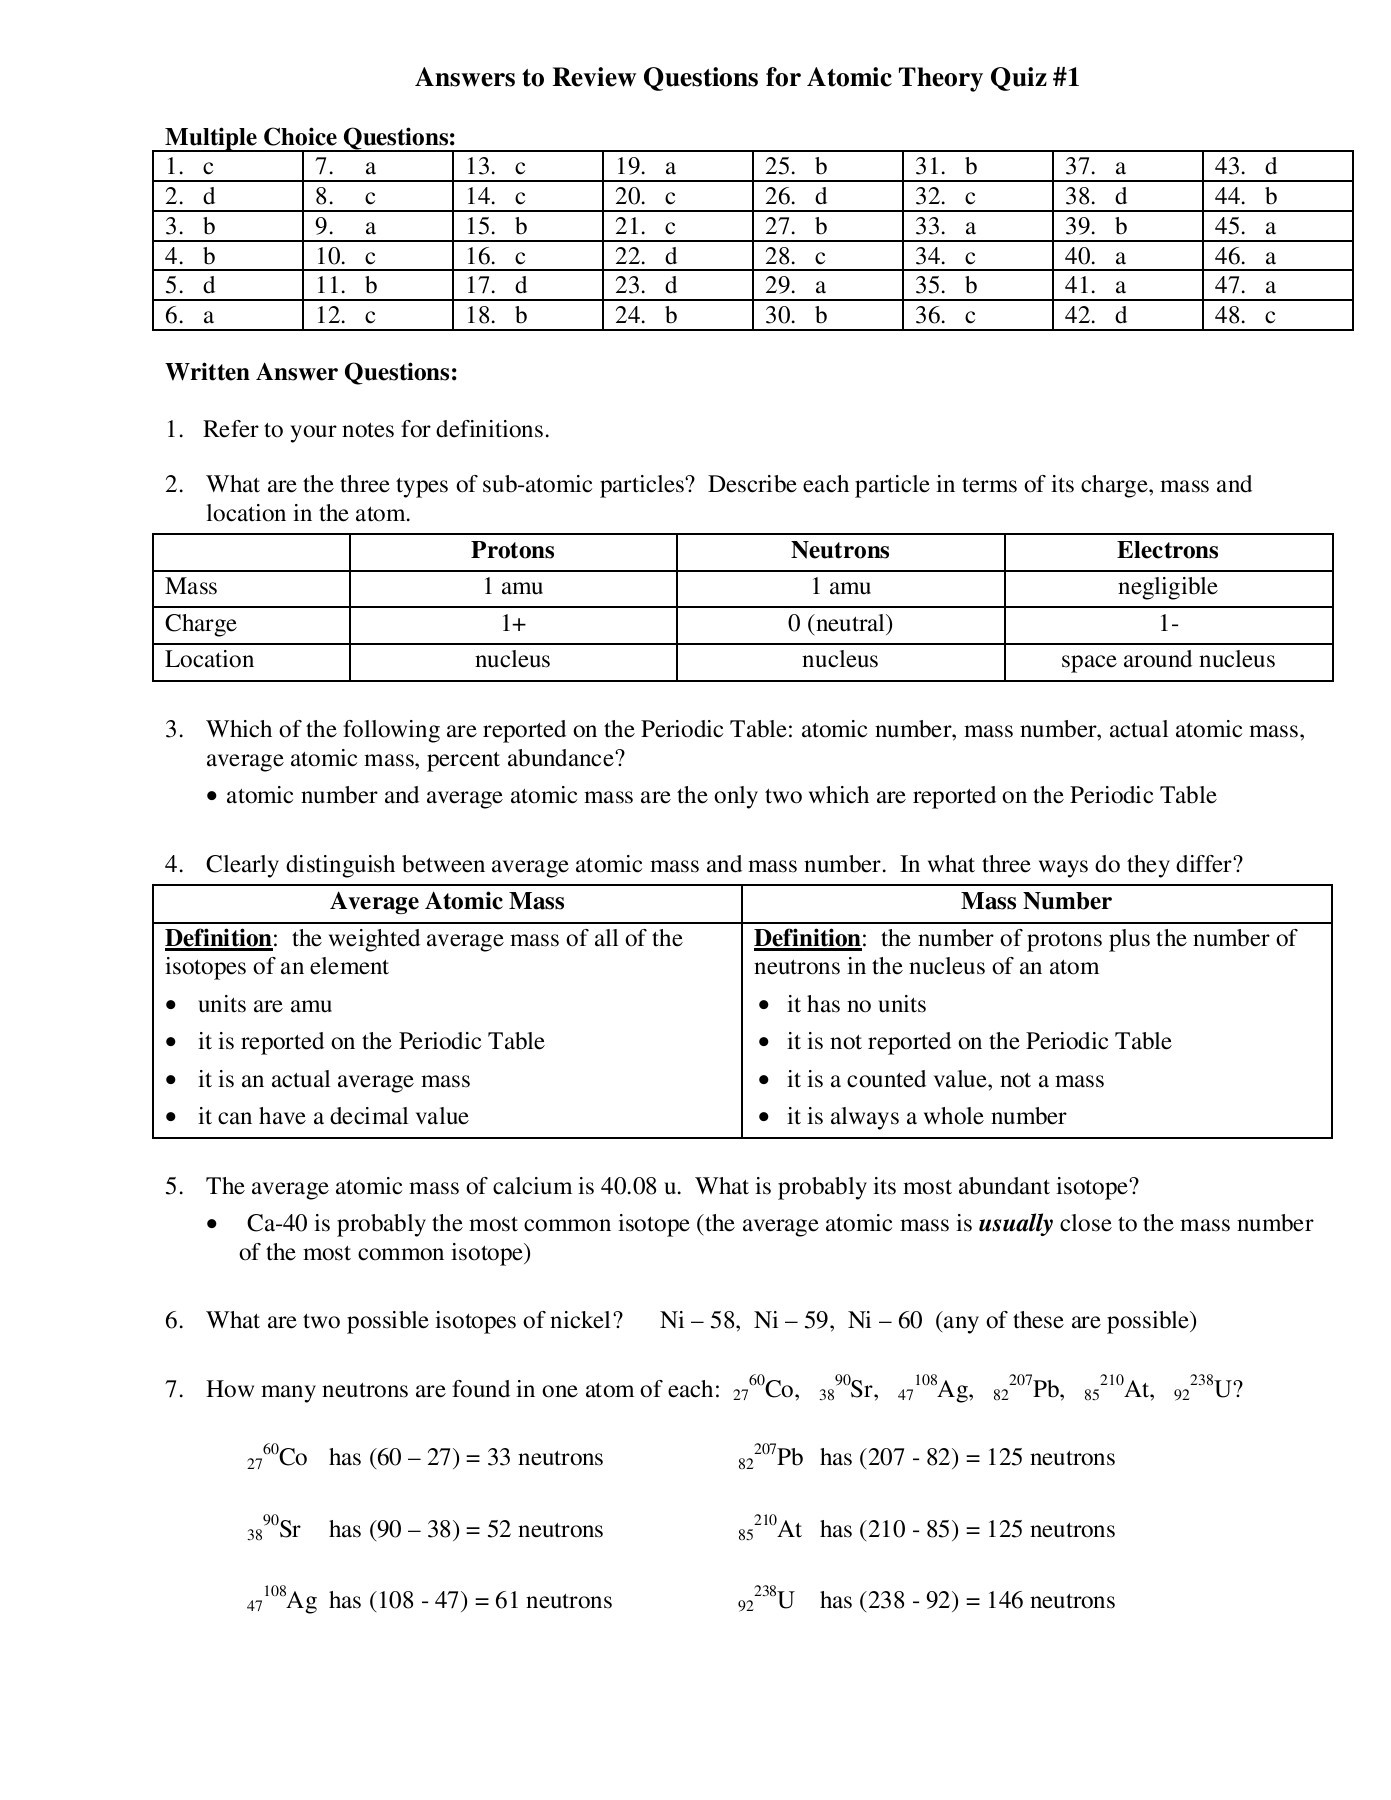 Bohr atomic Models Worksheet Answers Answers to Review Questions for atomic theory Quiz 1 Pages